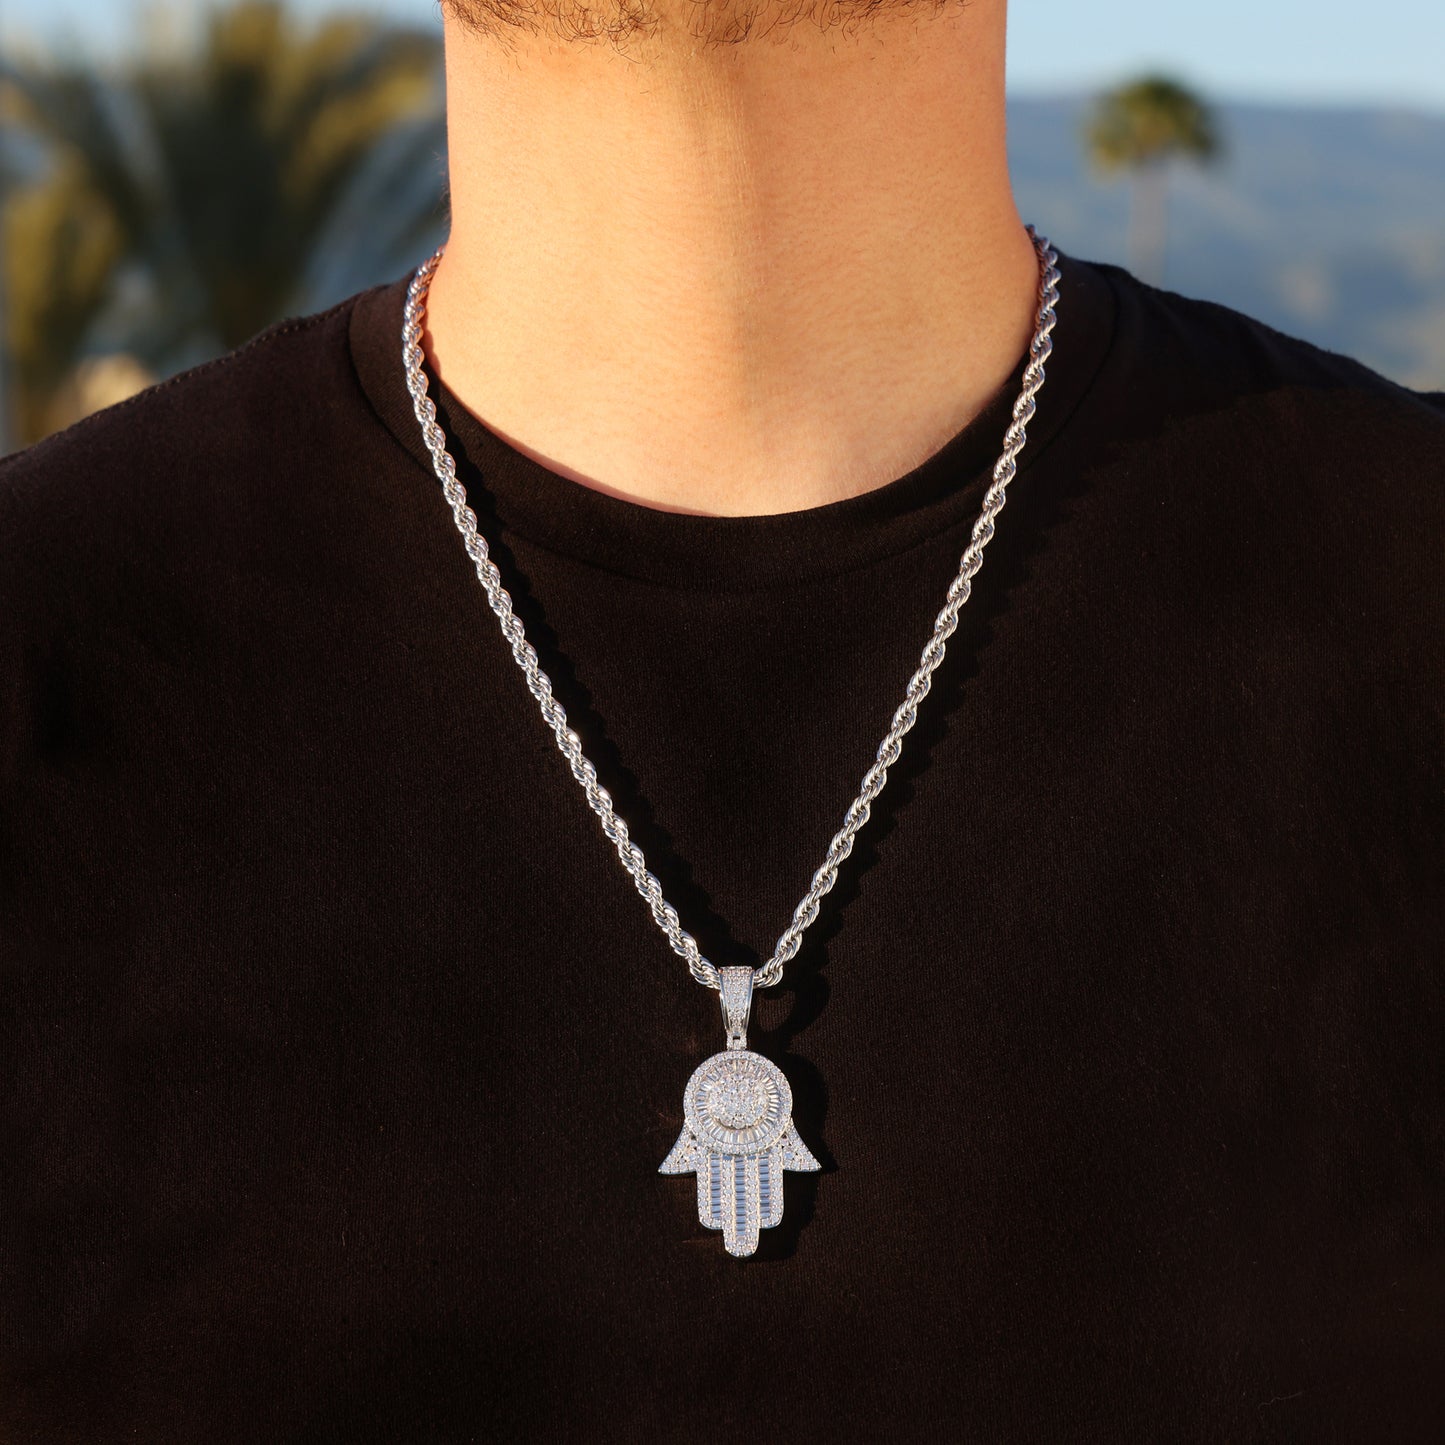 Large Fully Iced out Baguette Hamsah Pendant - White Gold